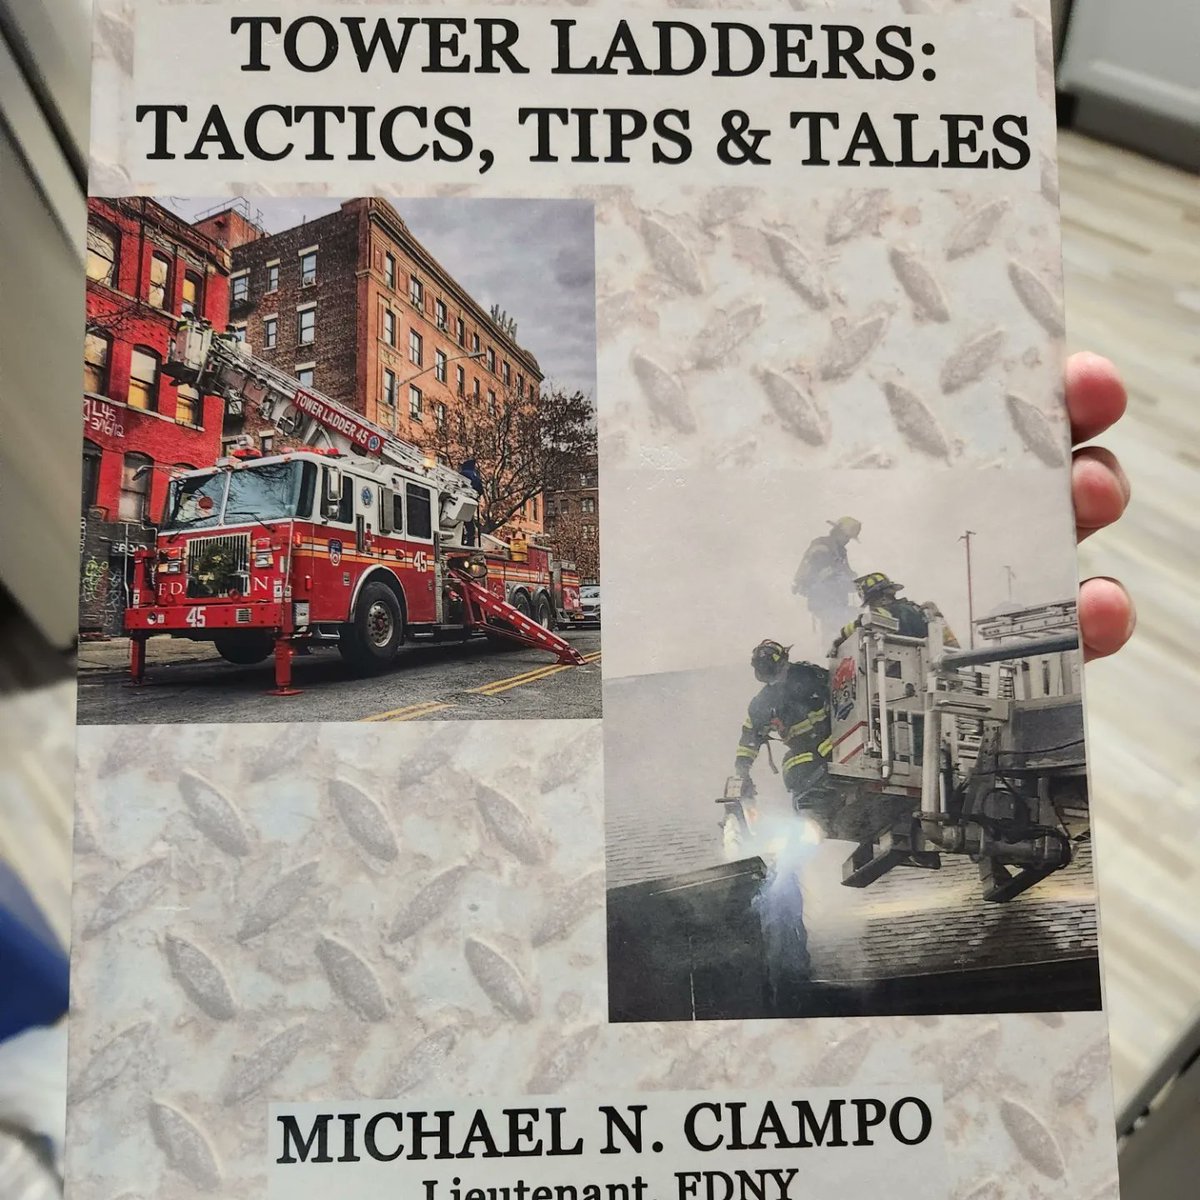 Got my copy of Mike Ciampo's new book 'Tower Ladders: Tactics, Tips & Tales' get yours today at mikeciampo.com/product-page/t…  
#champ #tricksandtips #ltmikeciampo